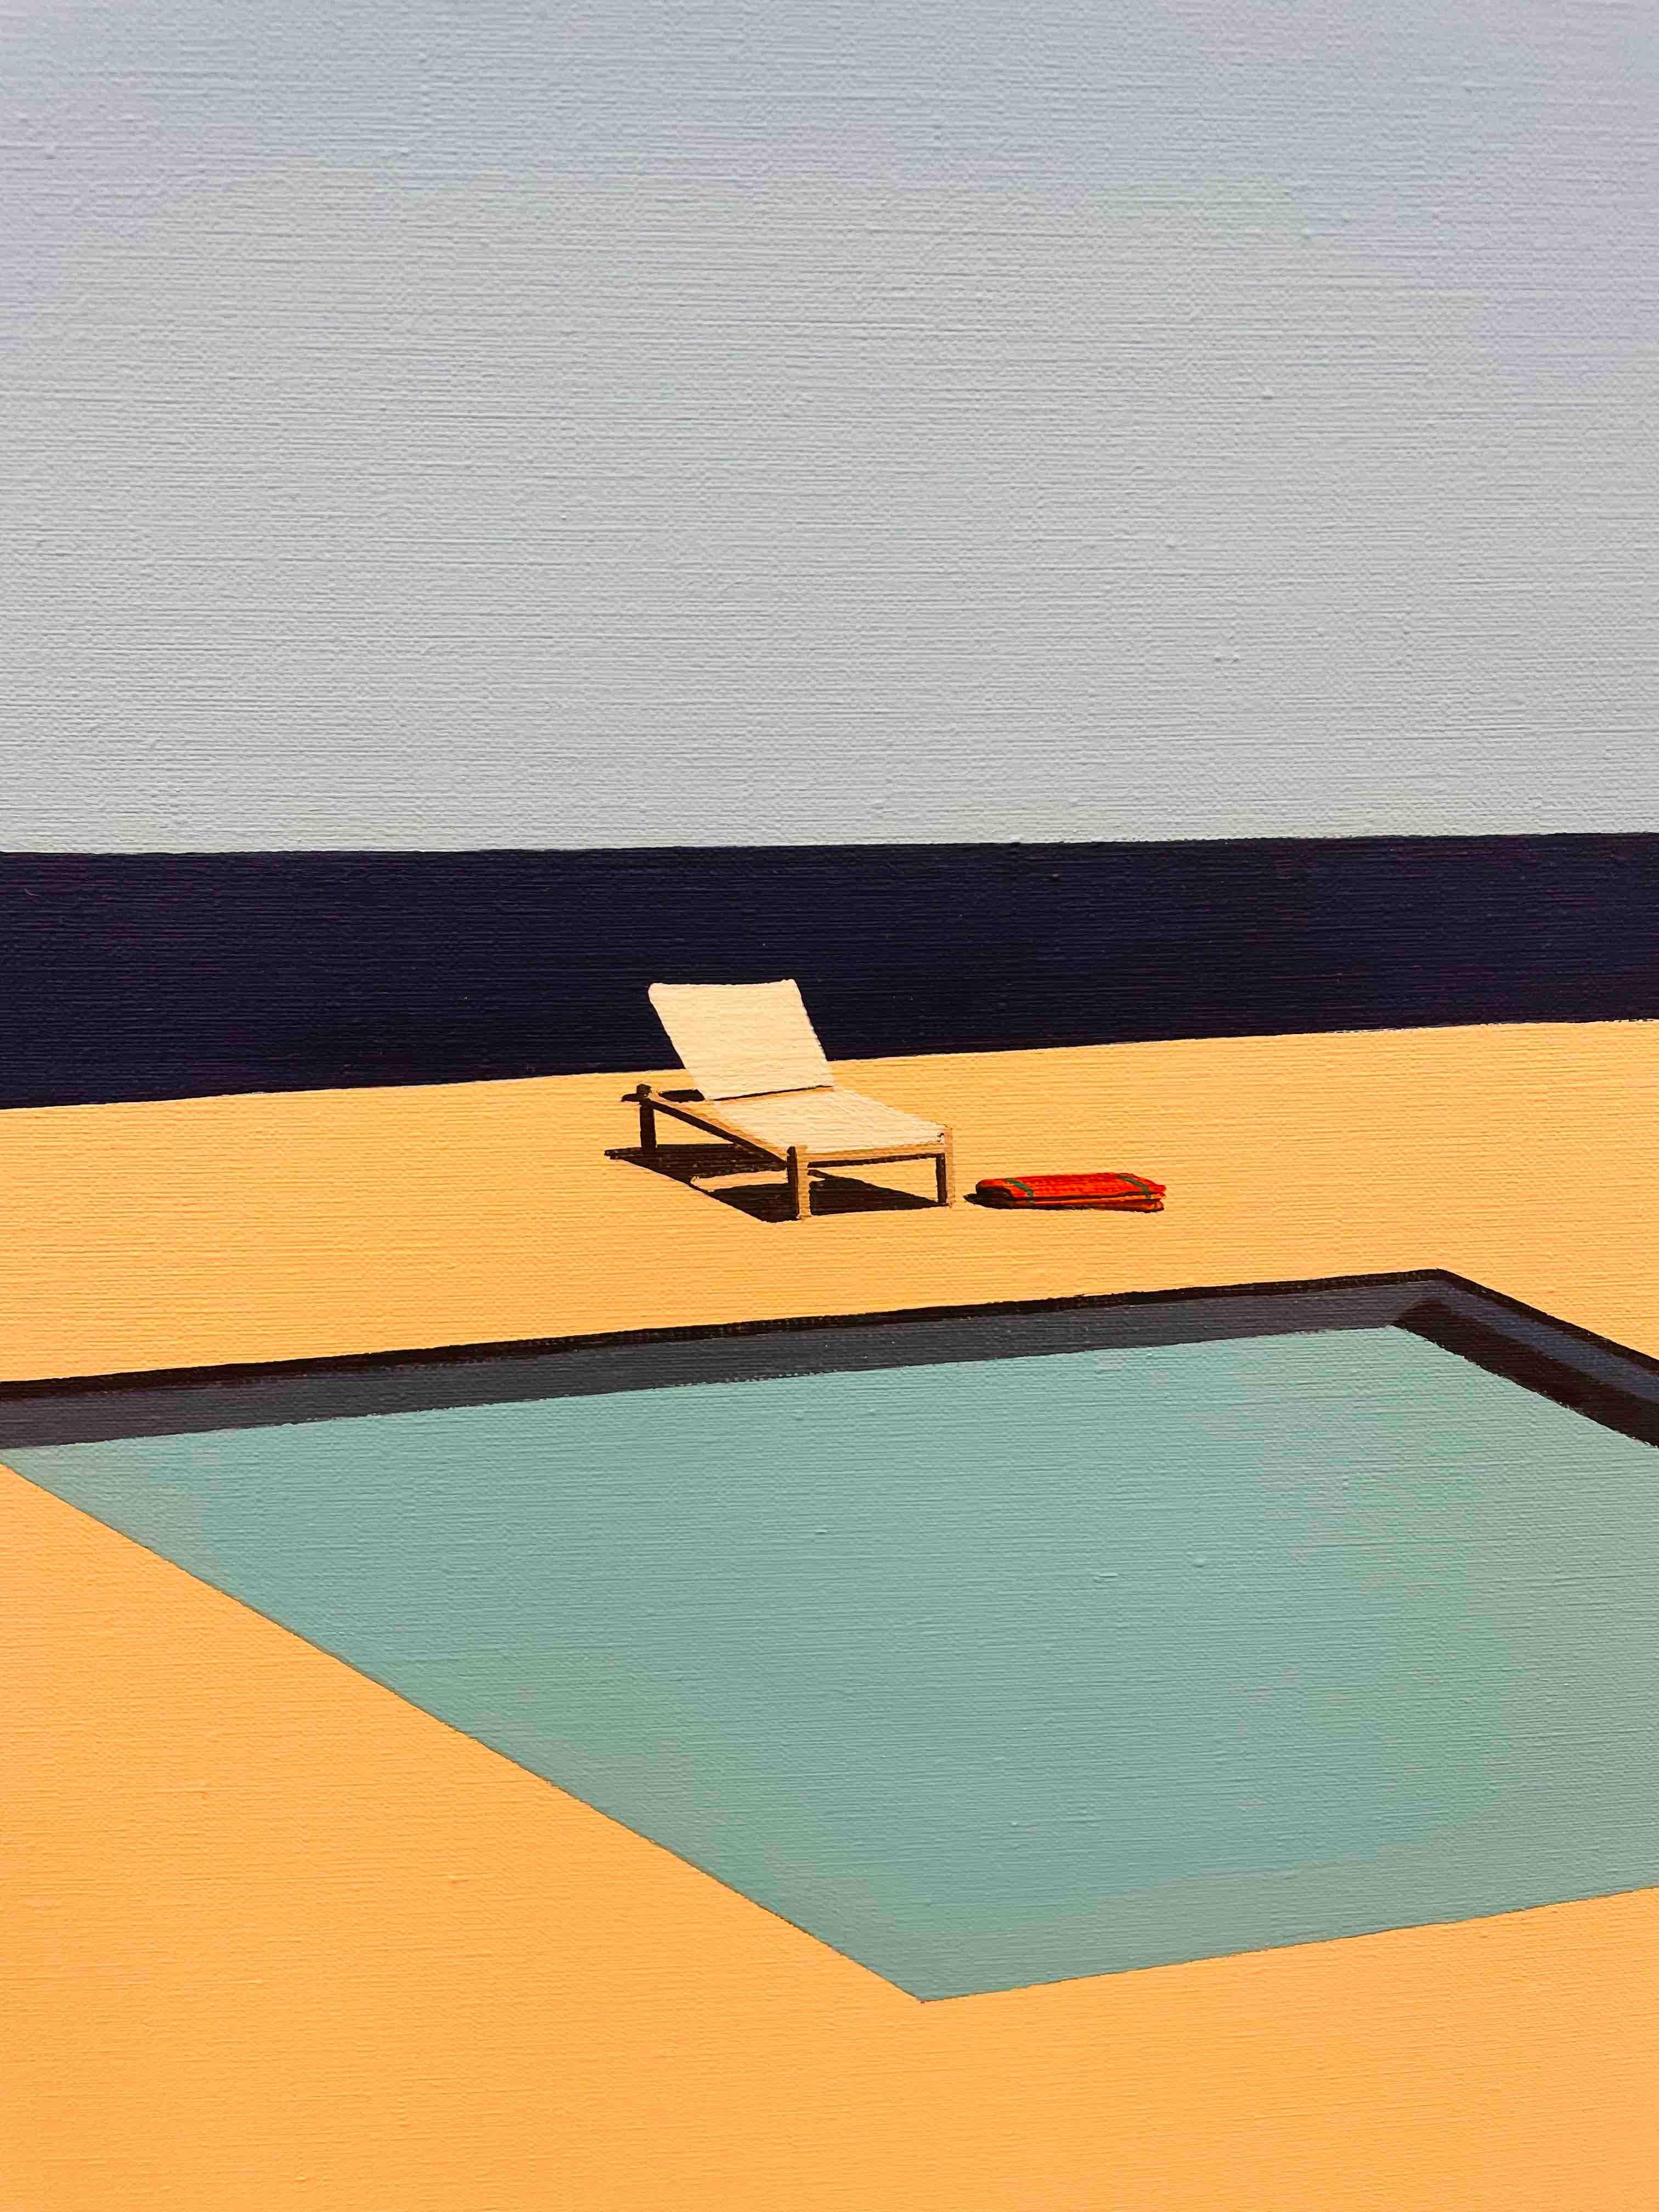 A pool with a view - landscape painting - Painting by Magdalena Laskowska